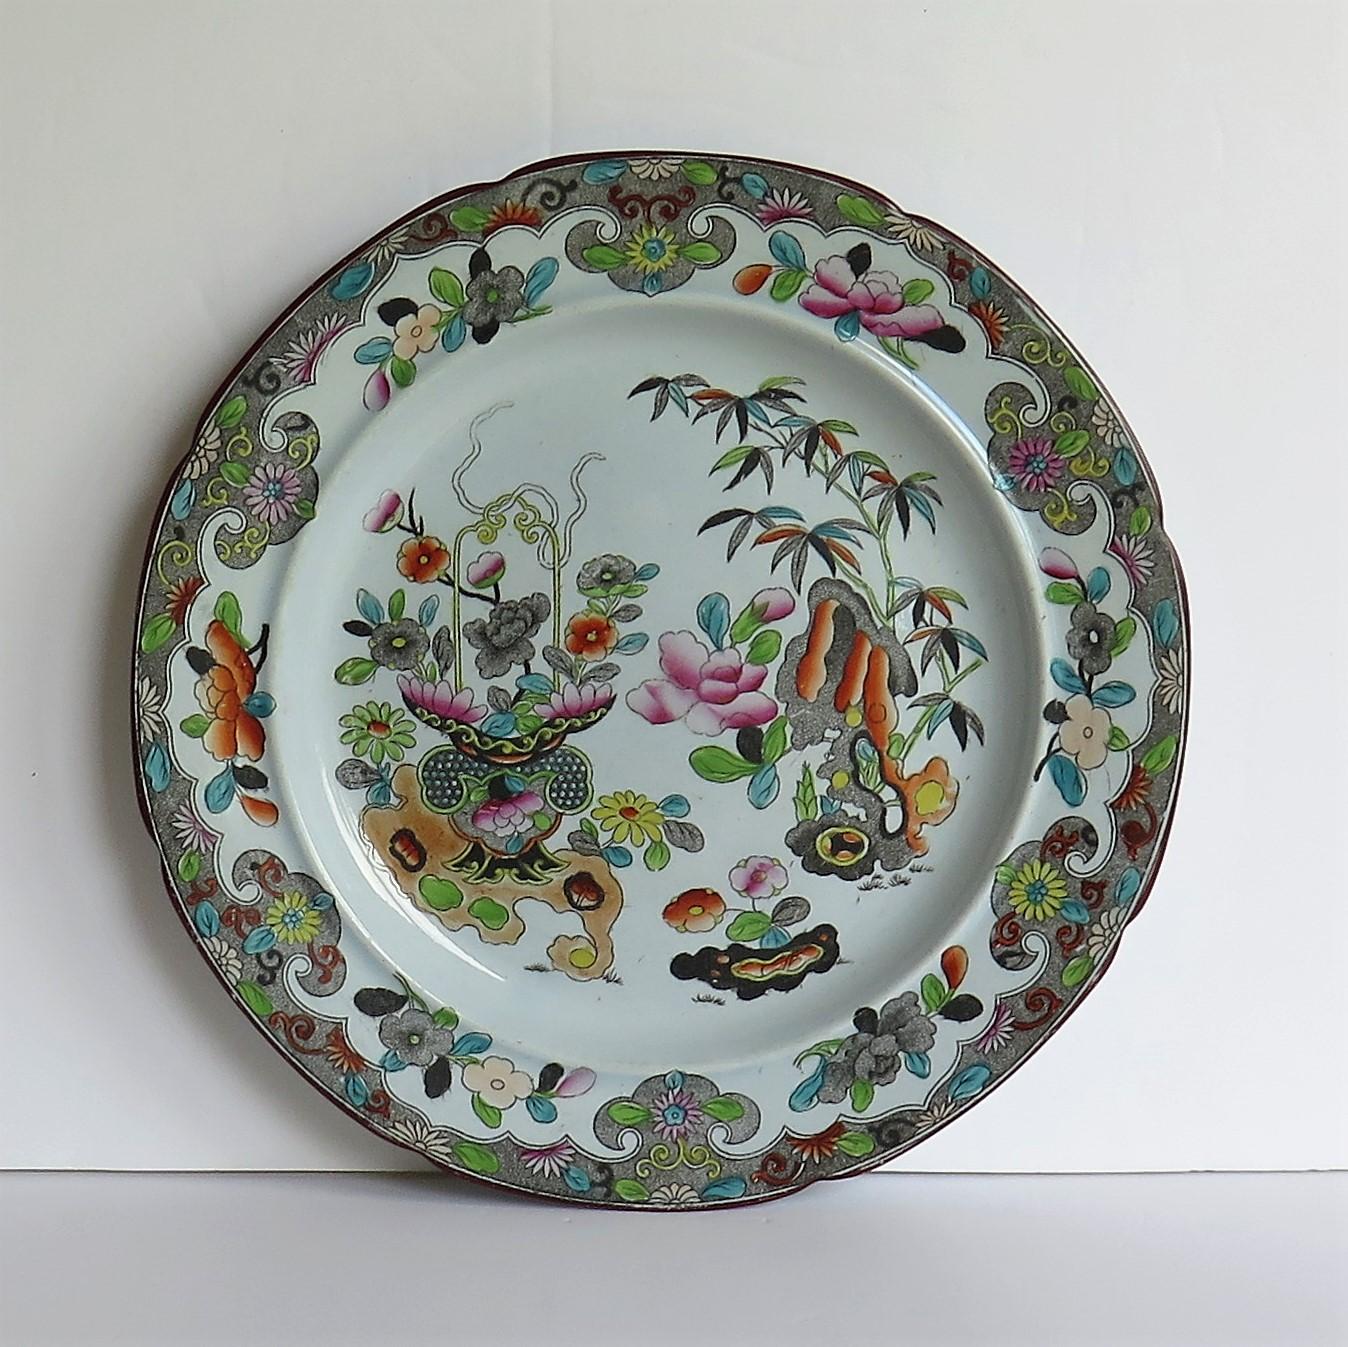 This is a rare early 19th Century Ironstone Dinner Plate made by Stephen Folch of Church Street, Stoke, Staffordshire Potteries, England between 1819 and 1829.

The plate has a light grey-blue glaze and has been beautifully and carefully